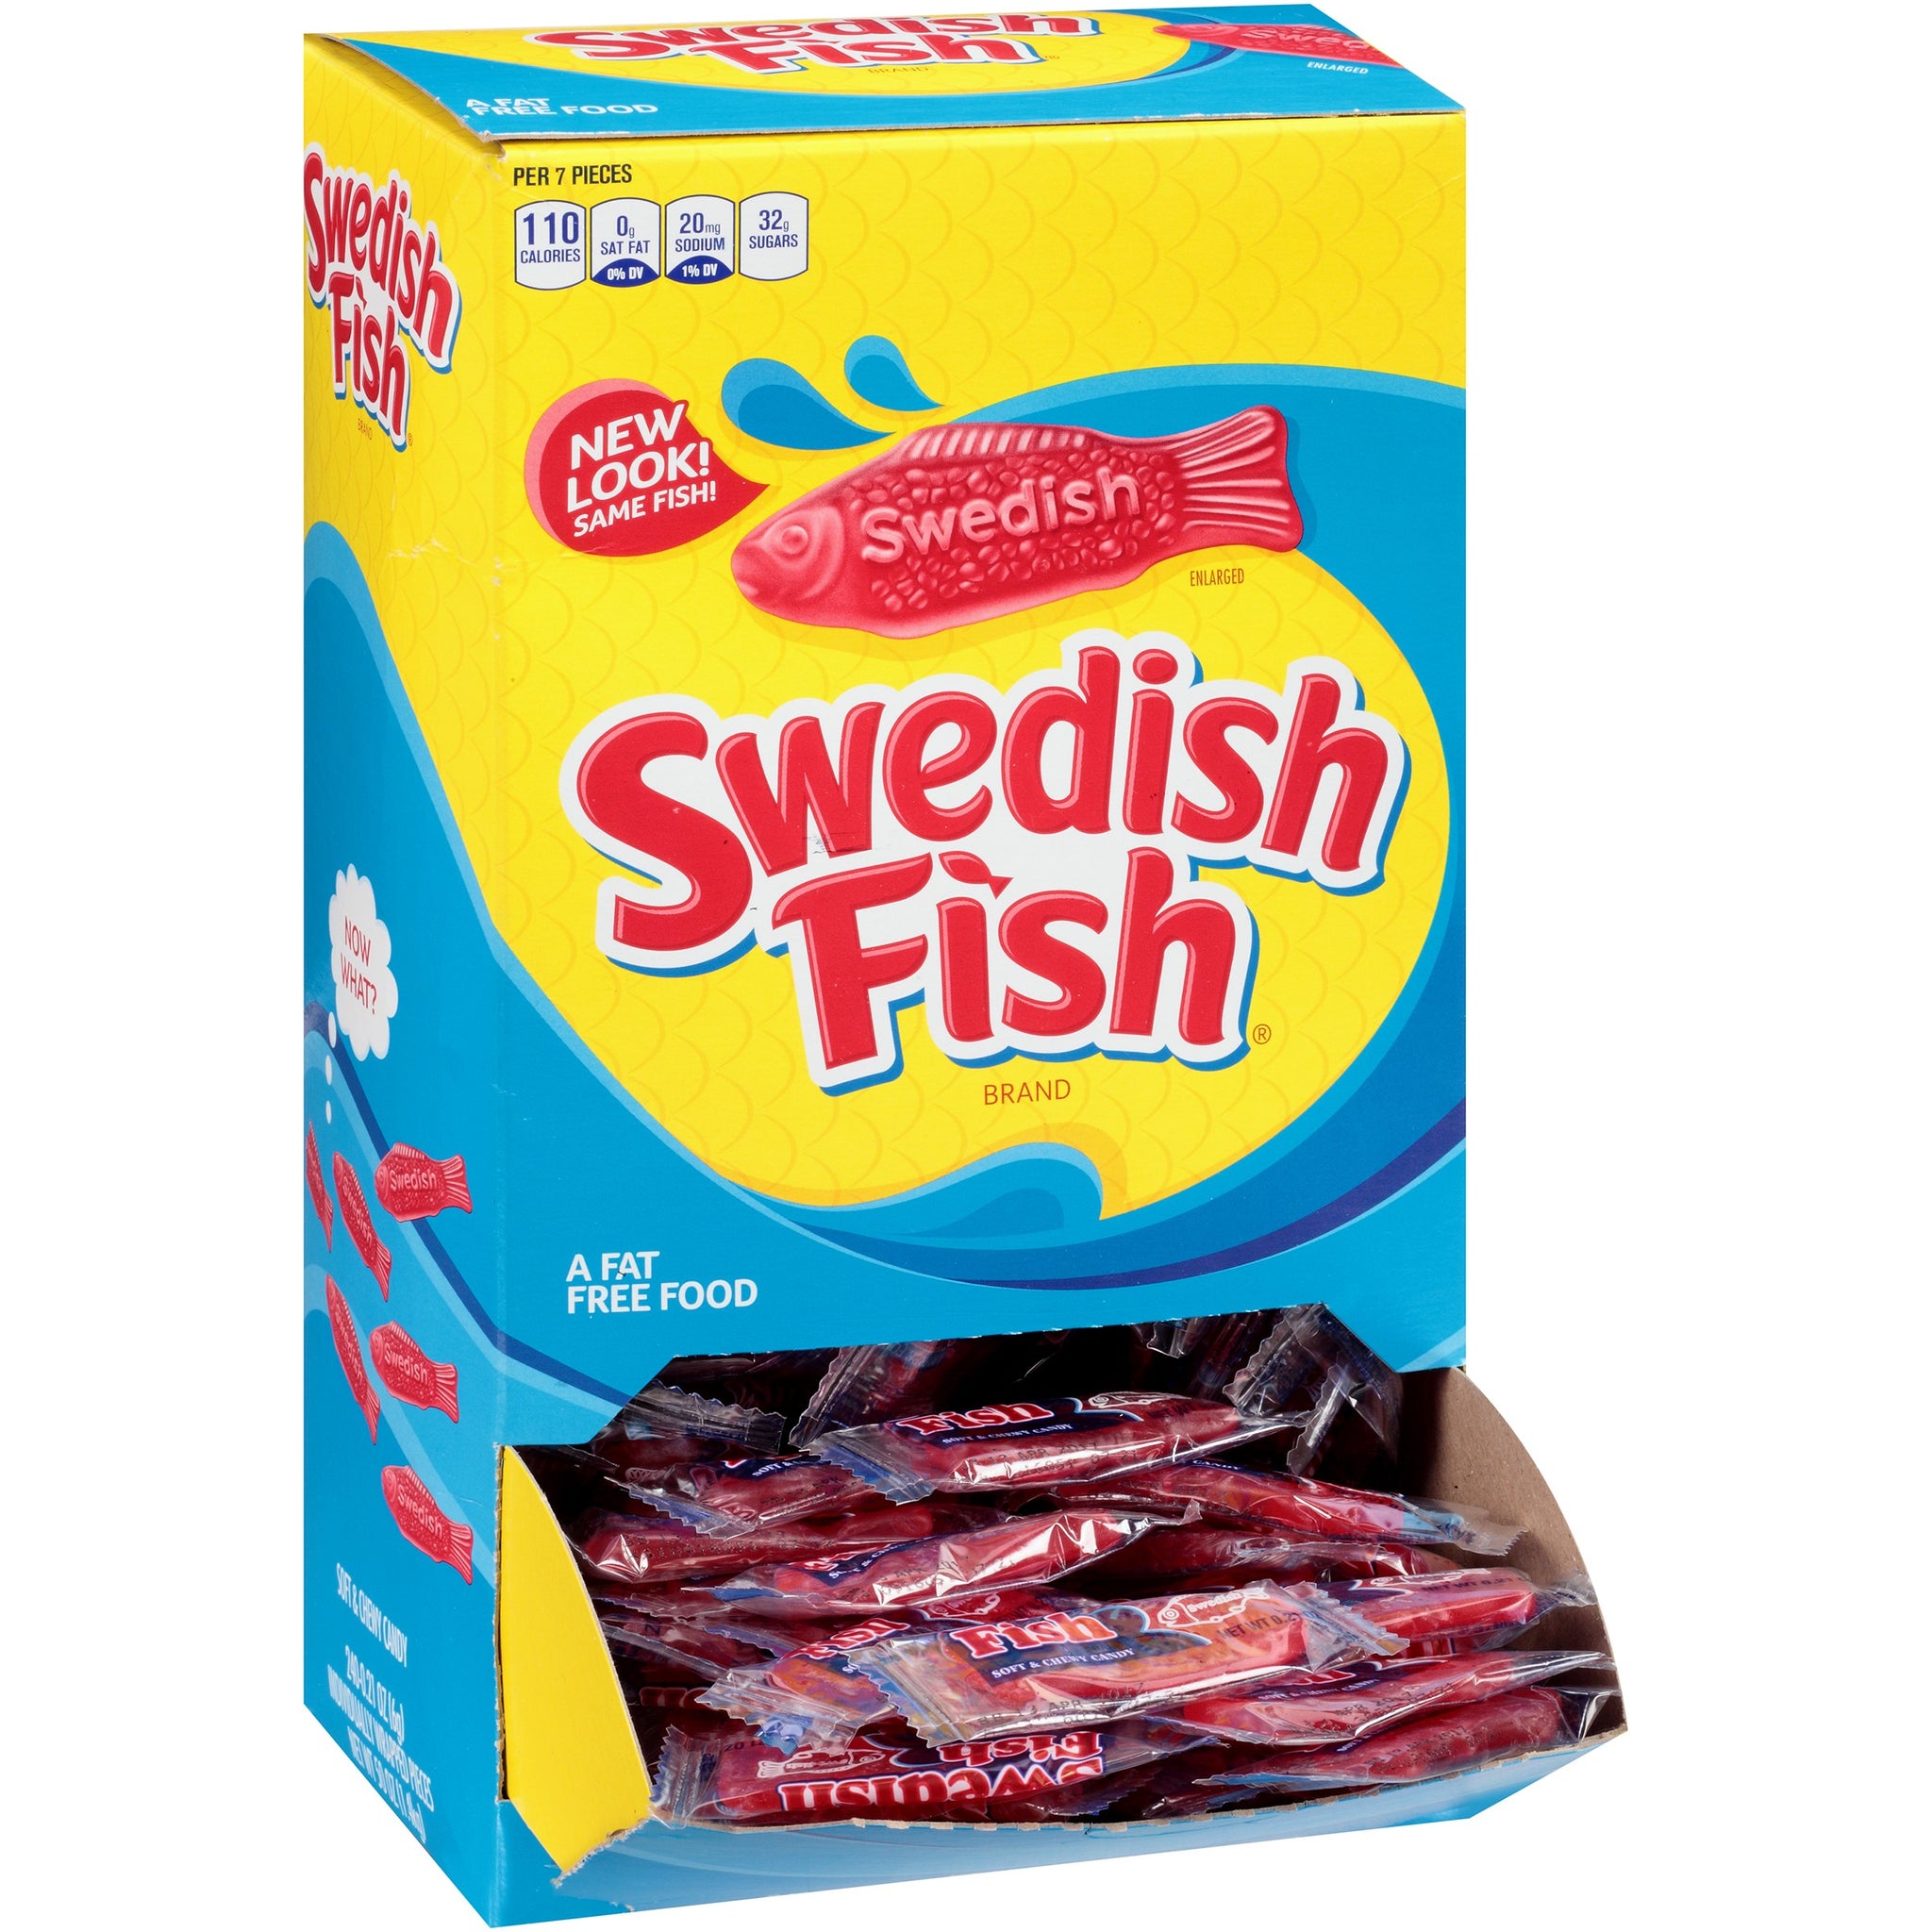 Swedish Fish Soft & Chewy Candy - Box of 240 - All City Candy